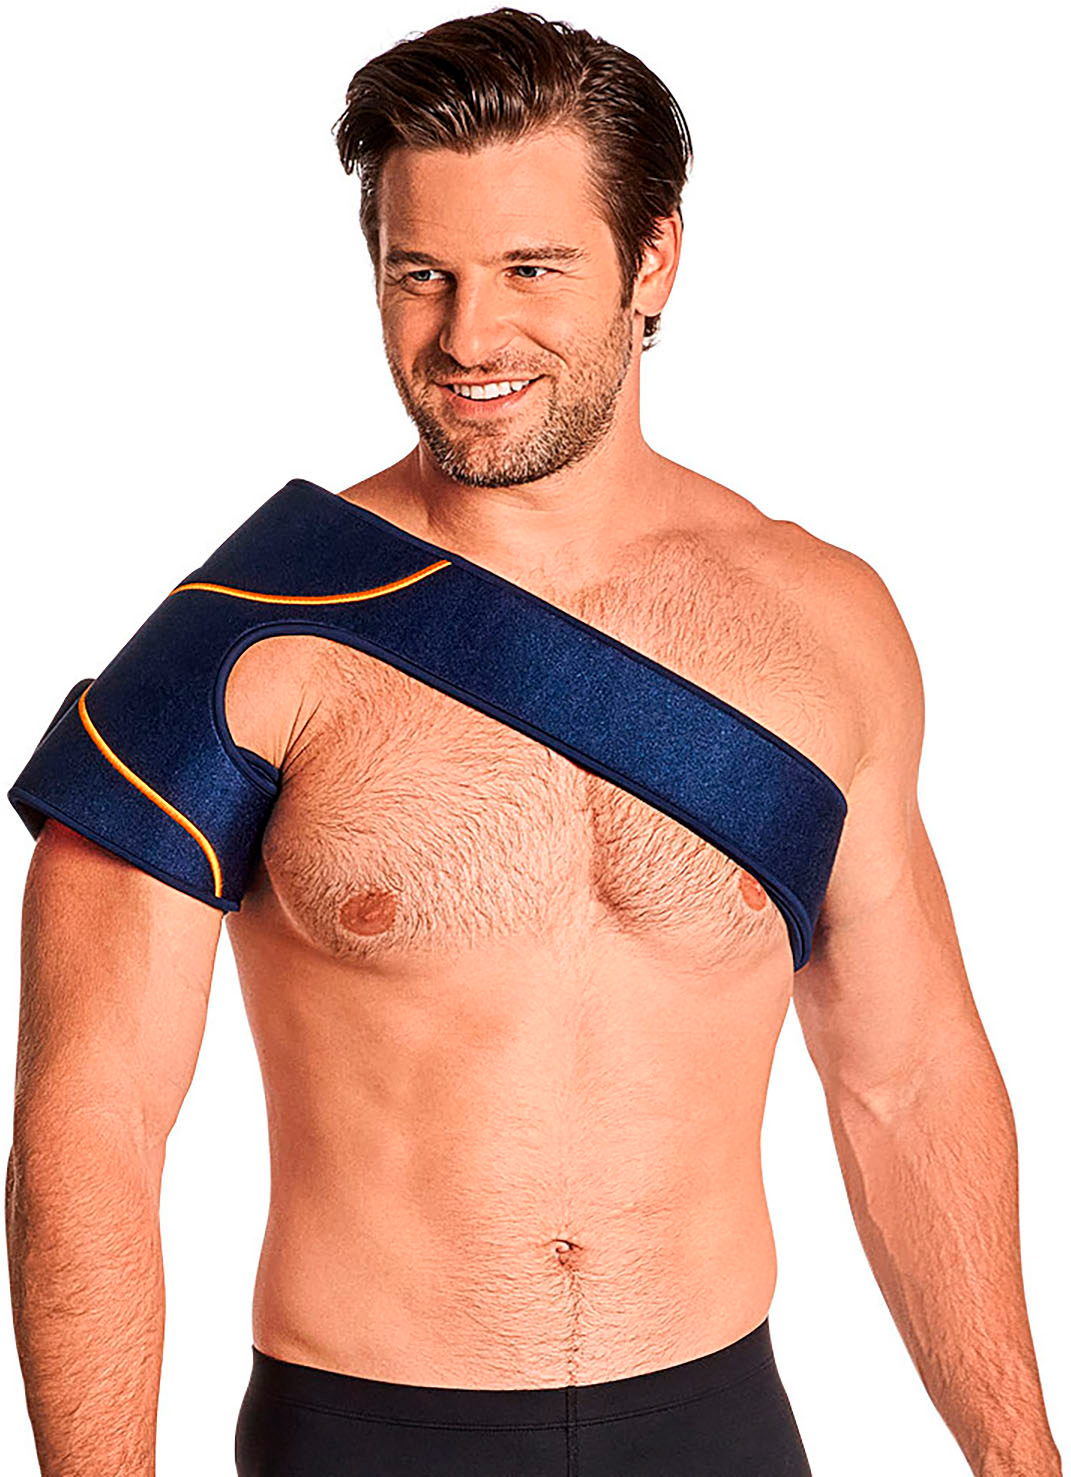 Best Buy: Tommie Copper Infrared Light Therapy Shoulder Wrap Dark